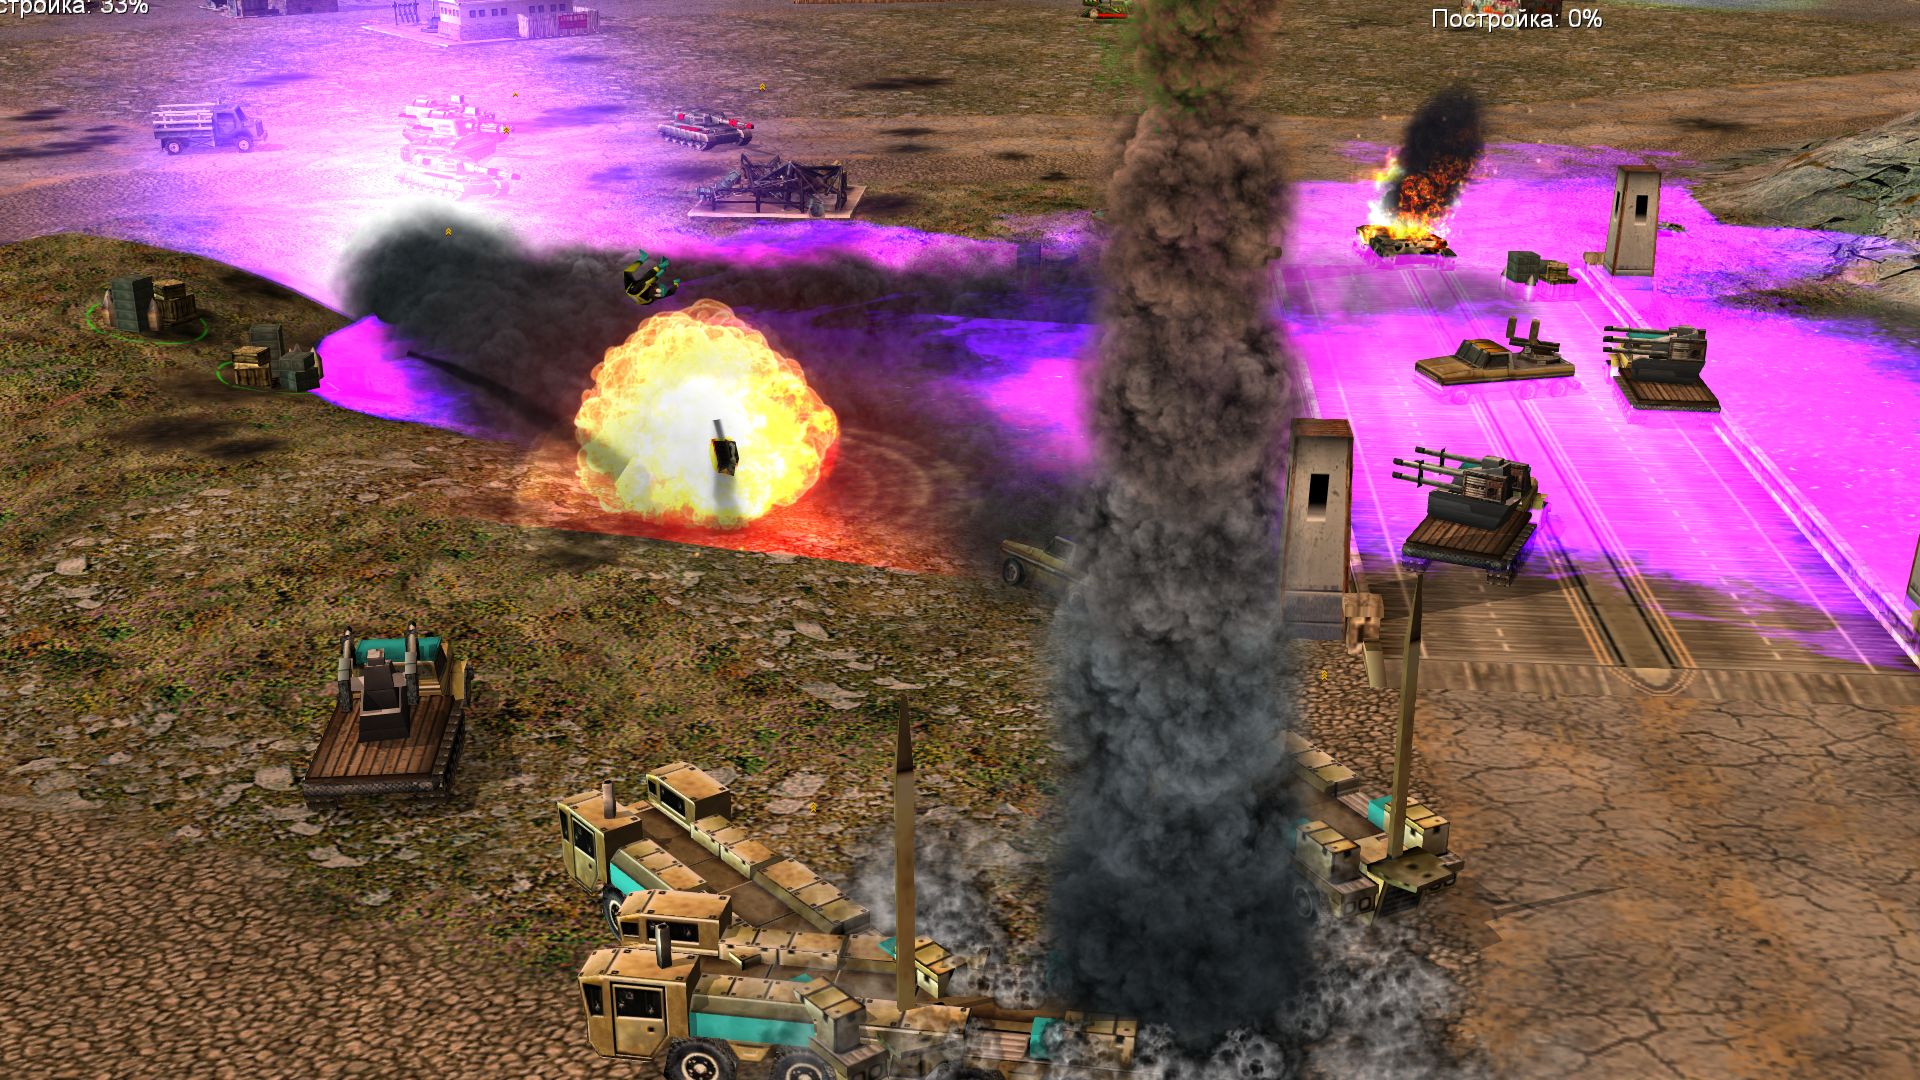 Rocket_launch_of_the_scud_toxin_general_